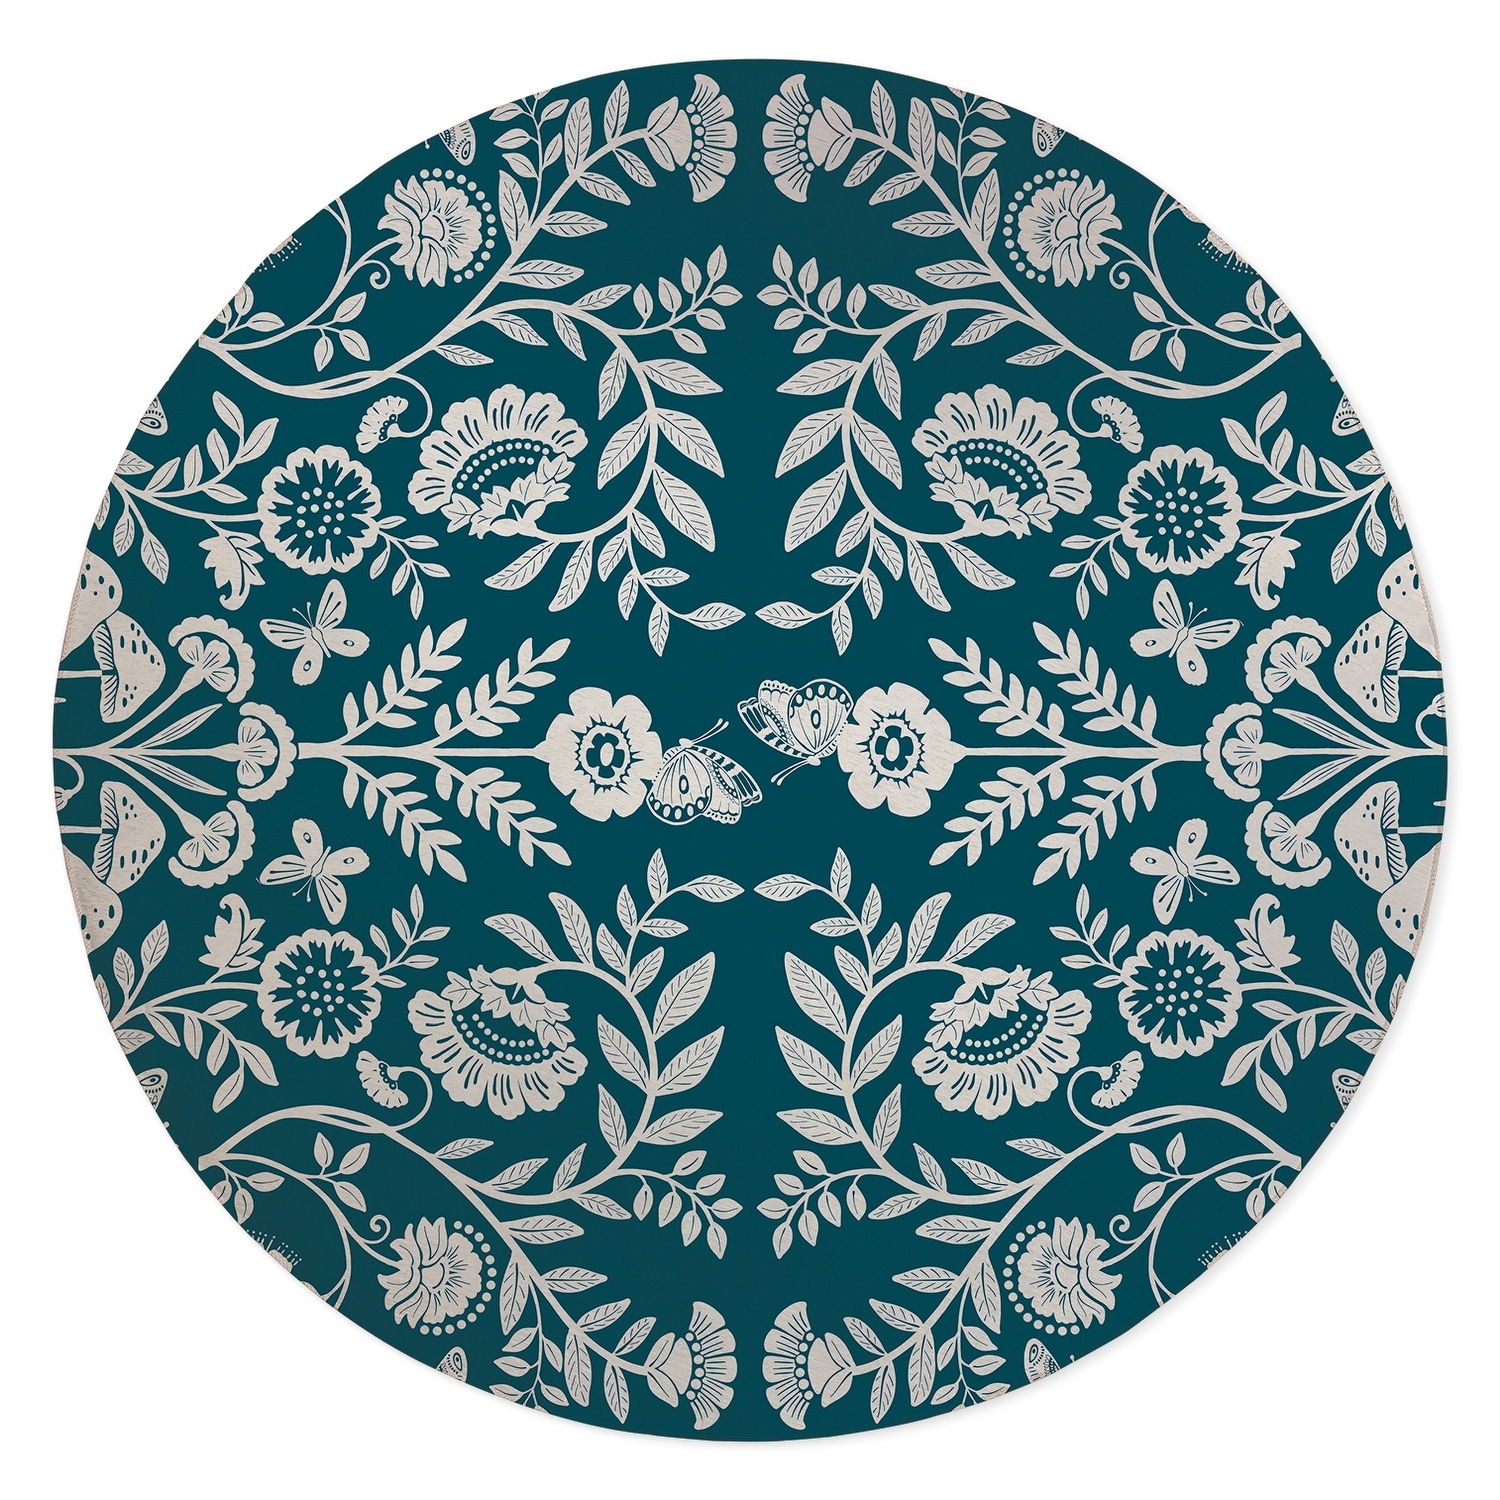 https://ak1.ostkcdn.com/images/products/is/images/direct/47bfaa5220ef4cc38fcc55a4b77b416c75df1b09/AUTUMN-BUTTERFLY-GARDEN-TEAL-Indoor-Floor-Mat-By-Kavka-Designs.jpg